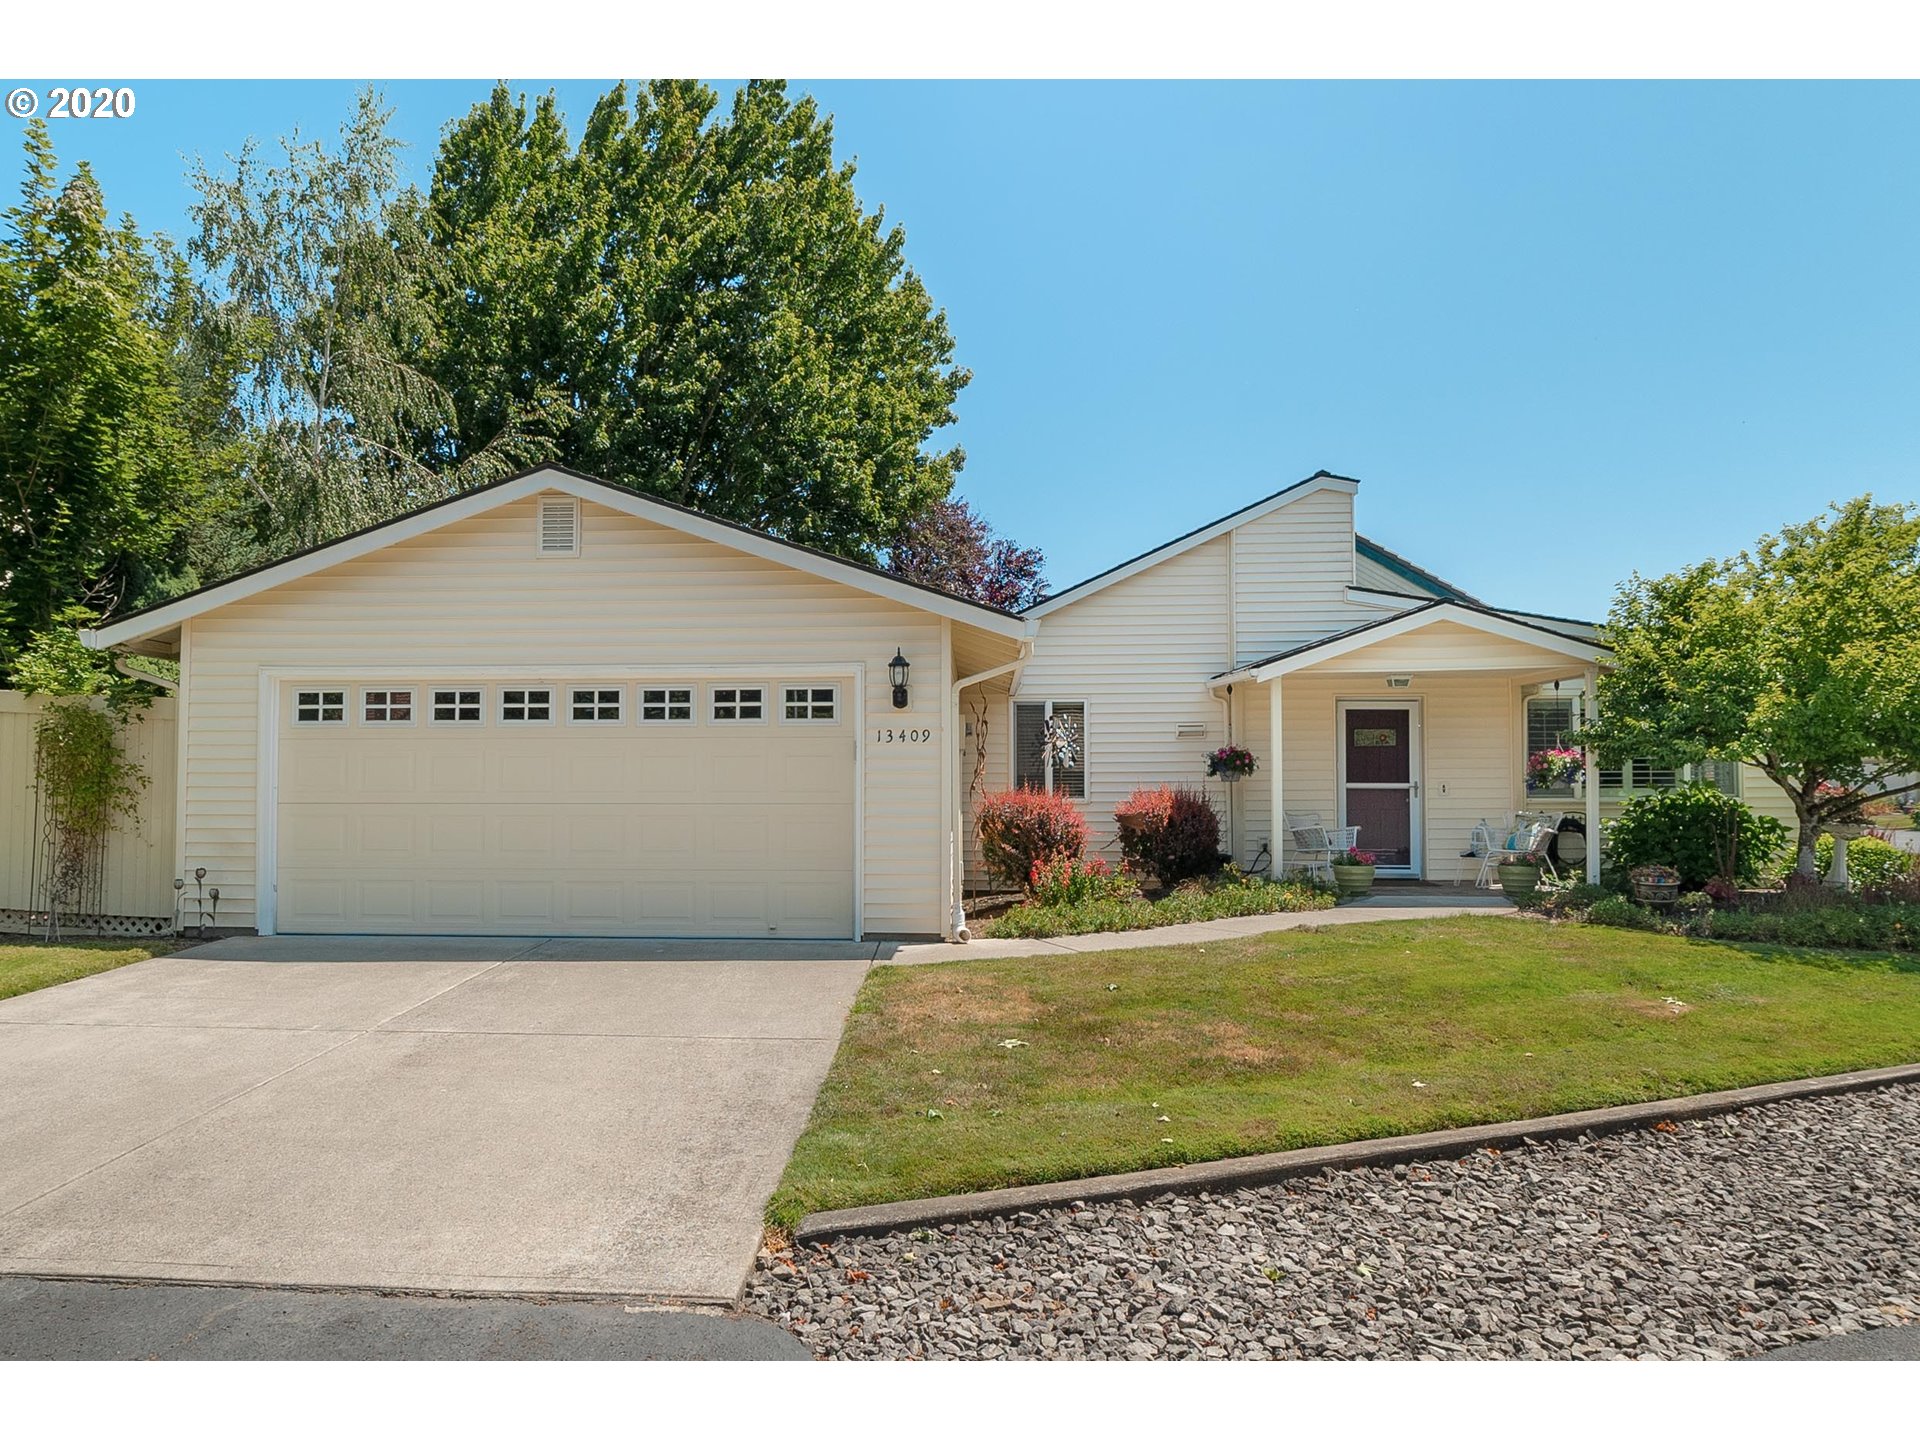 13409 NW 13TH AVE (1 of 24)